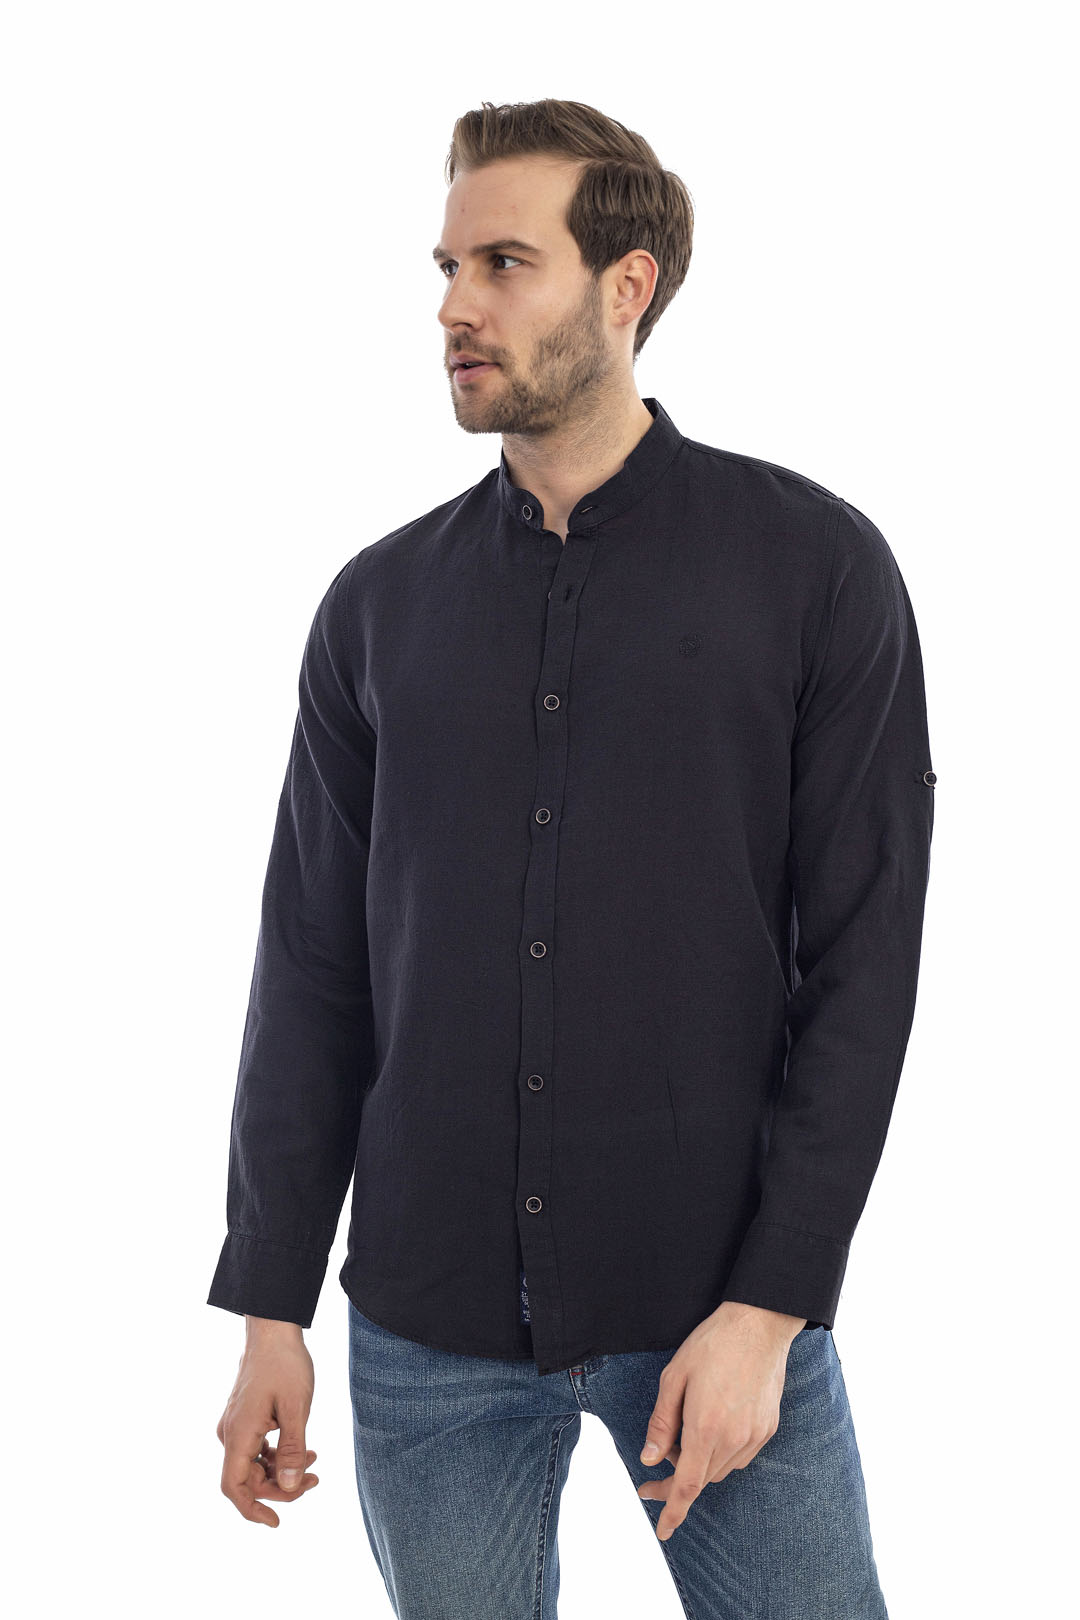 ODLO Men's ESSENTIAL SEAMLESS Run Long Sleeve : Buy Online at Best Price in  KSA - Souq is now : Fashion